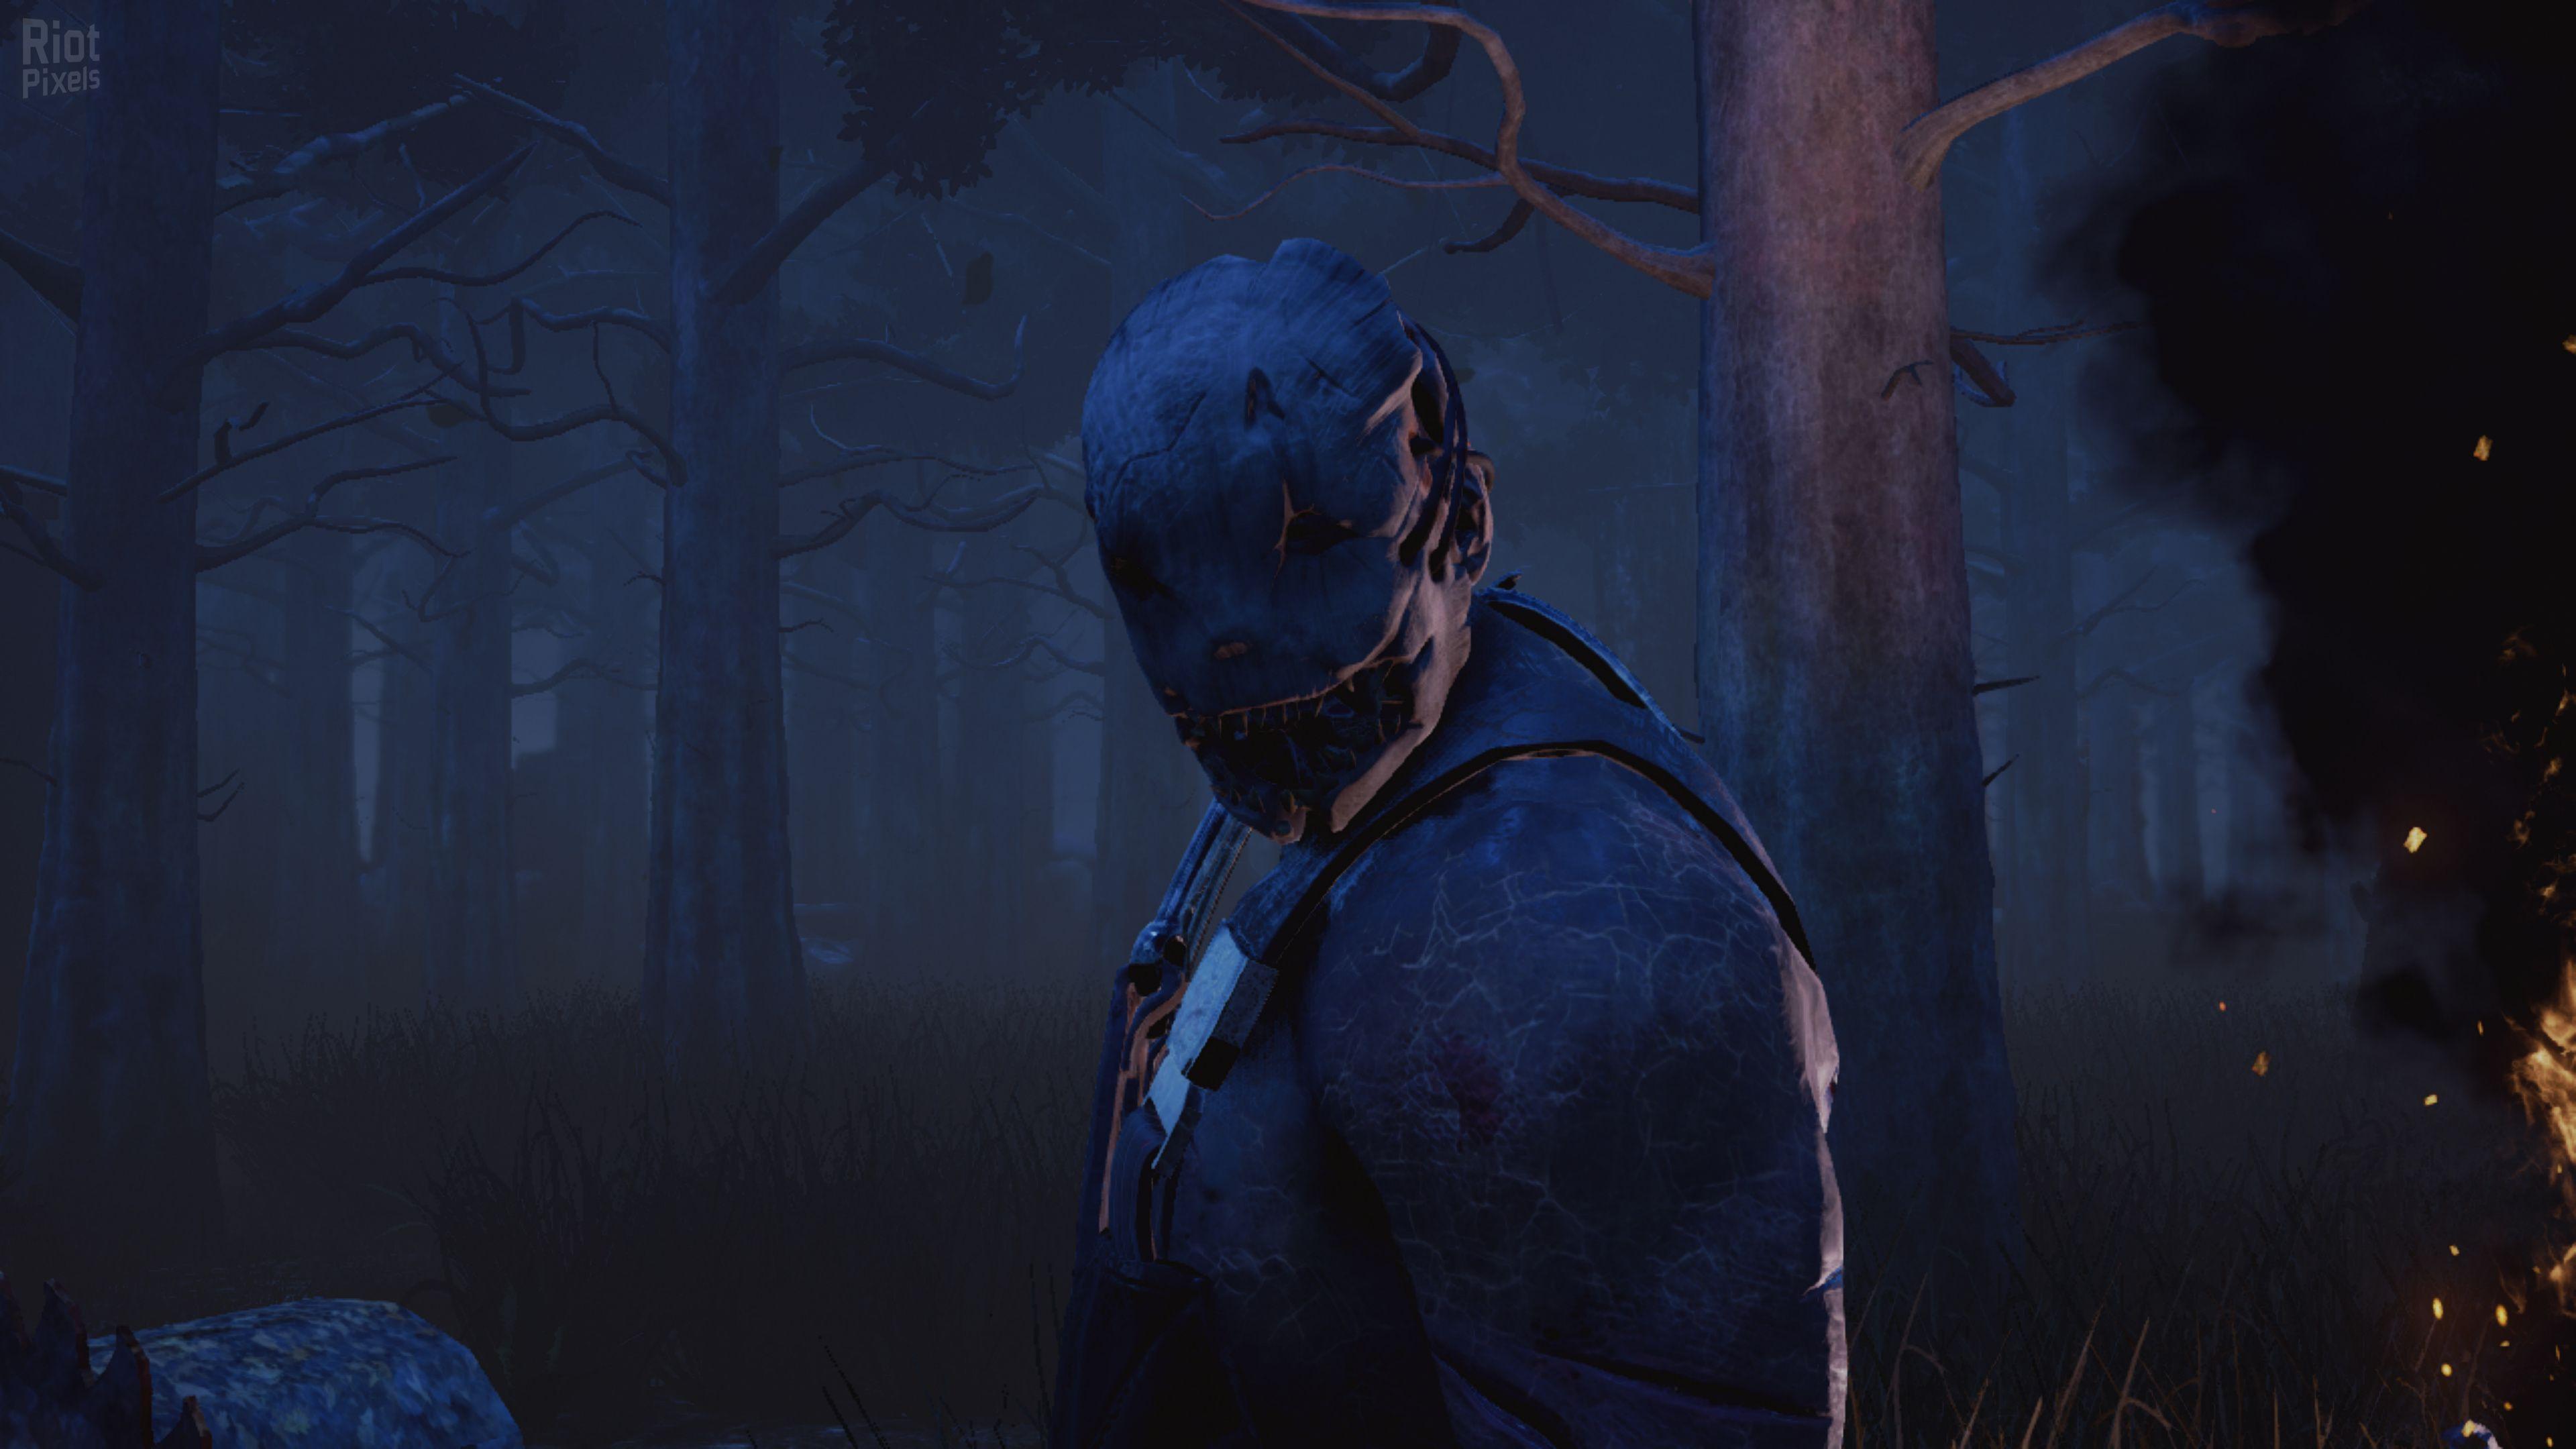 Dead by Daylight screenshots at Riot Pixels, image